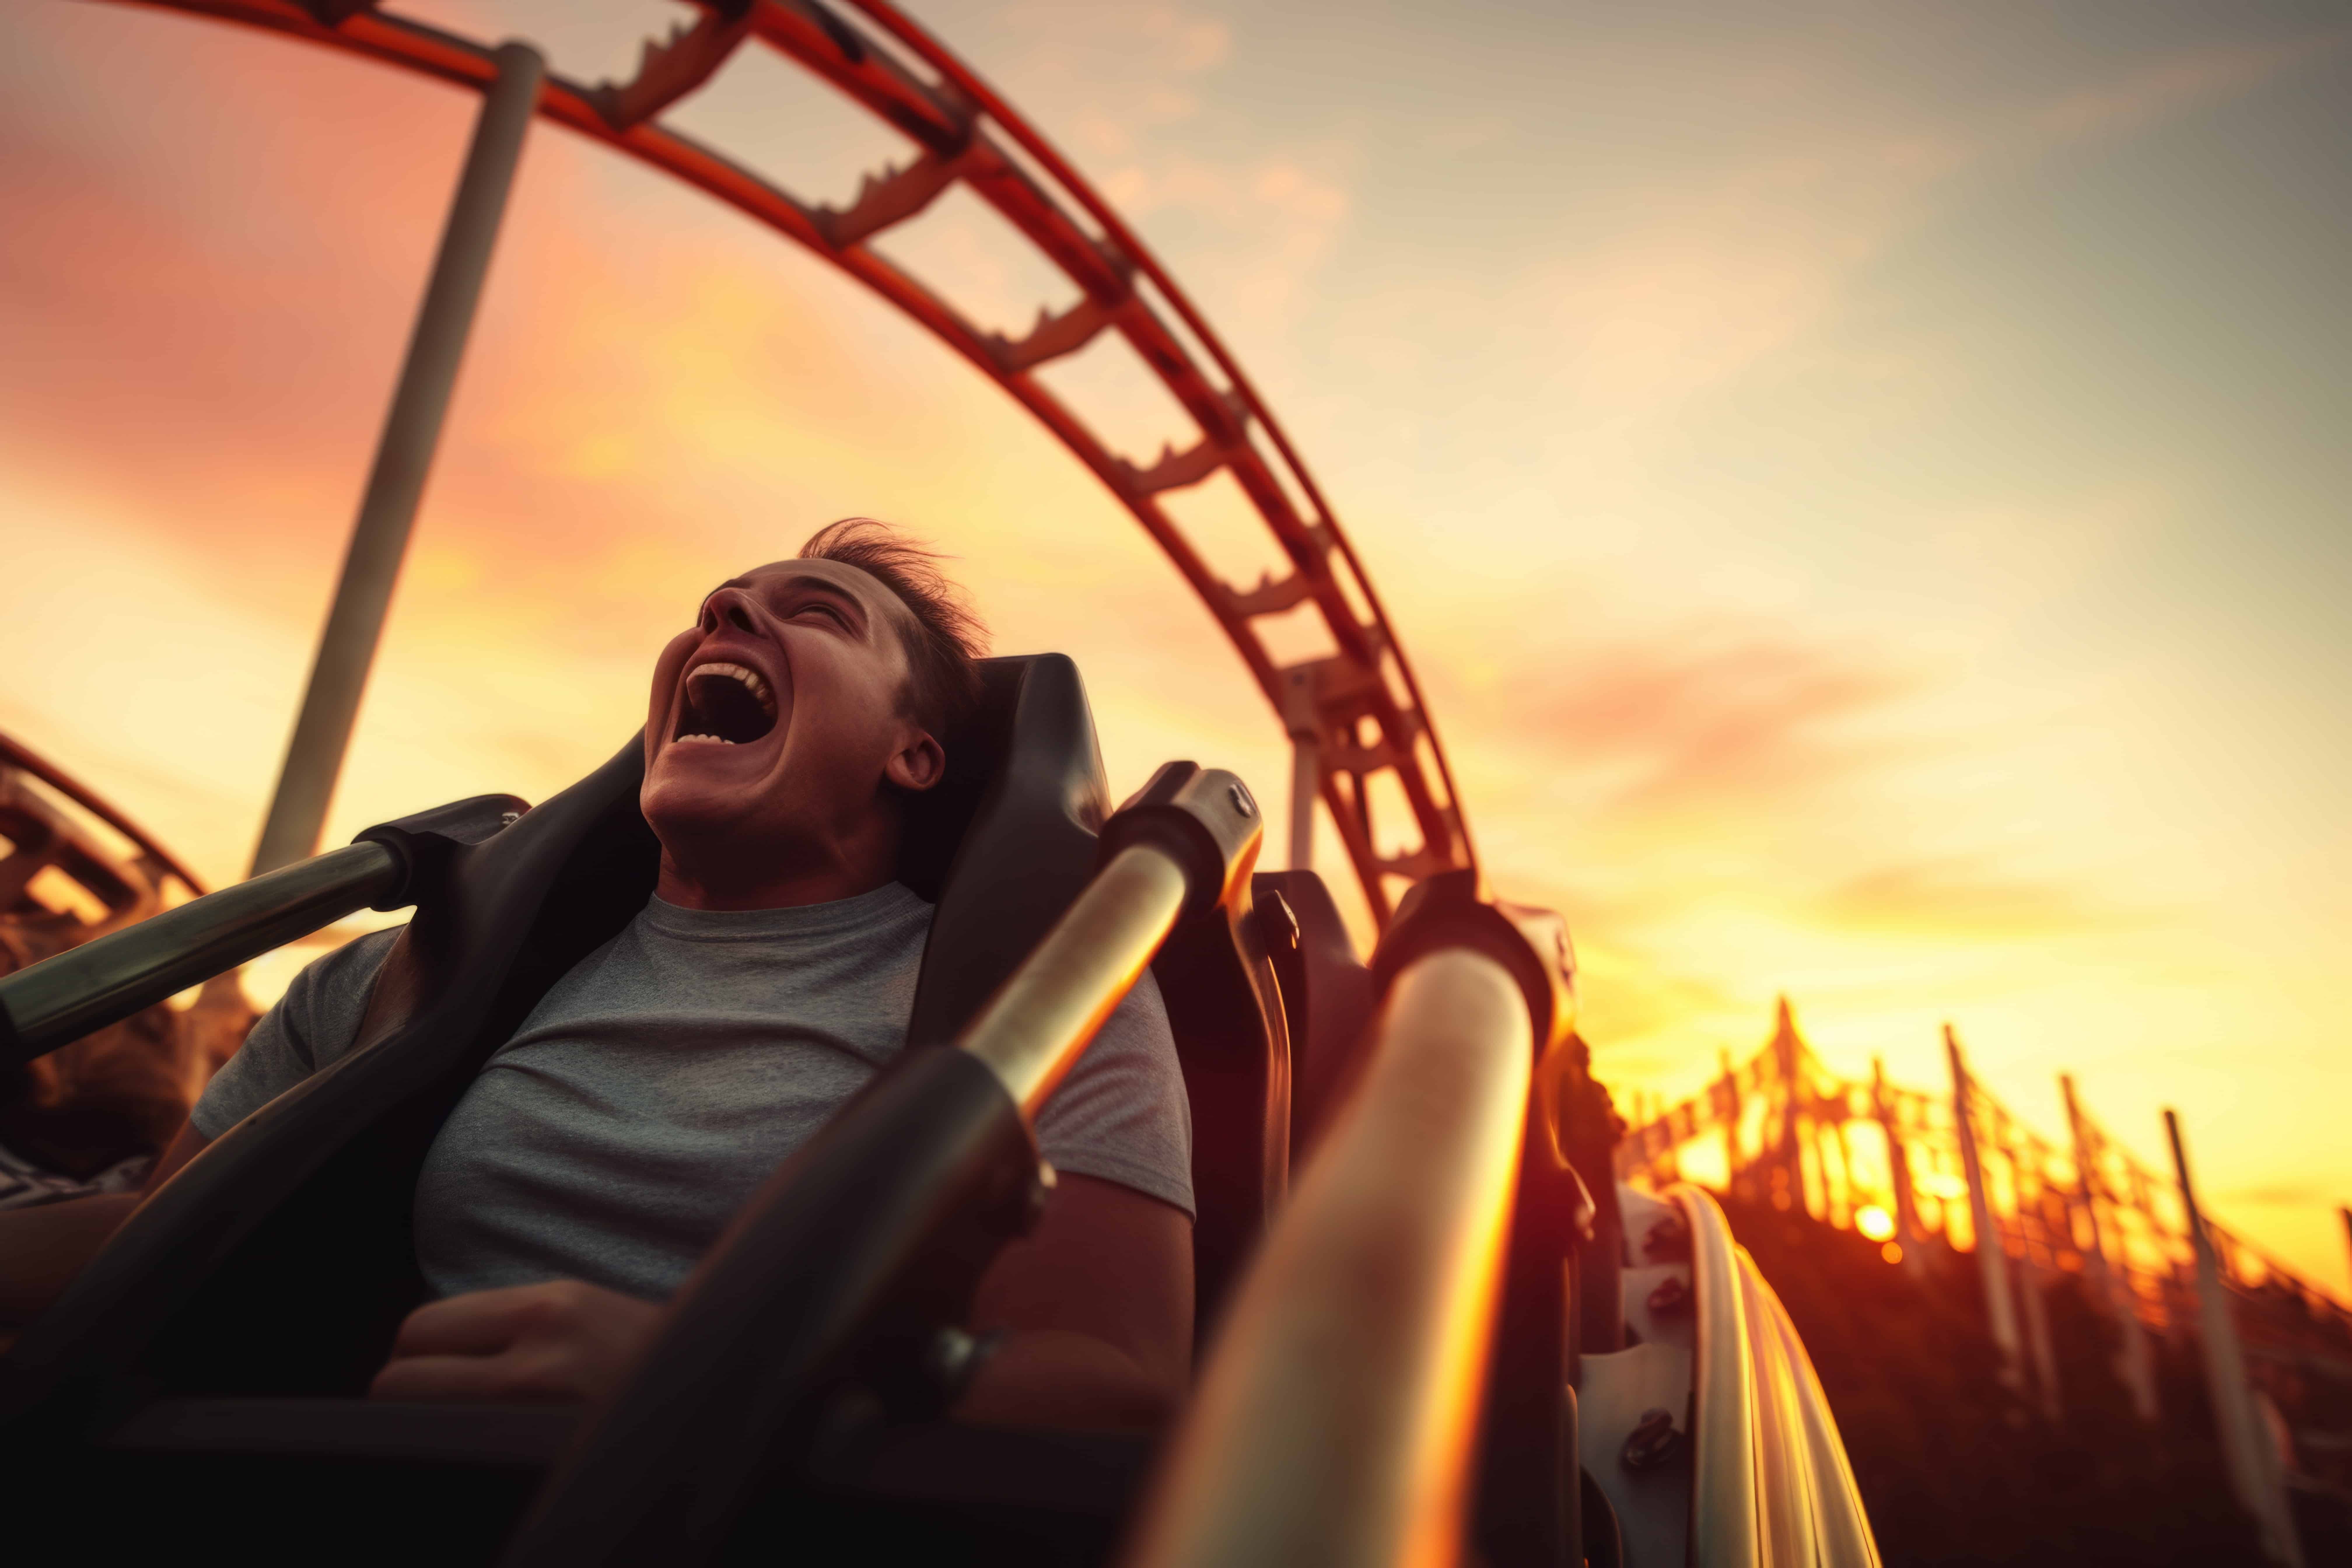 Stunned enthusiastic happy funny shocked amazed wonder screaming yelling male guy open mouth wide scream shout yell joyful young man riding rollercoaster amusement park amazing attraction fun holiday.